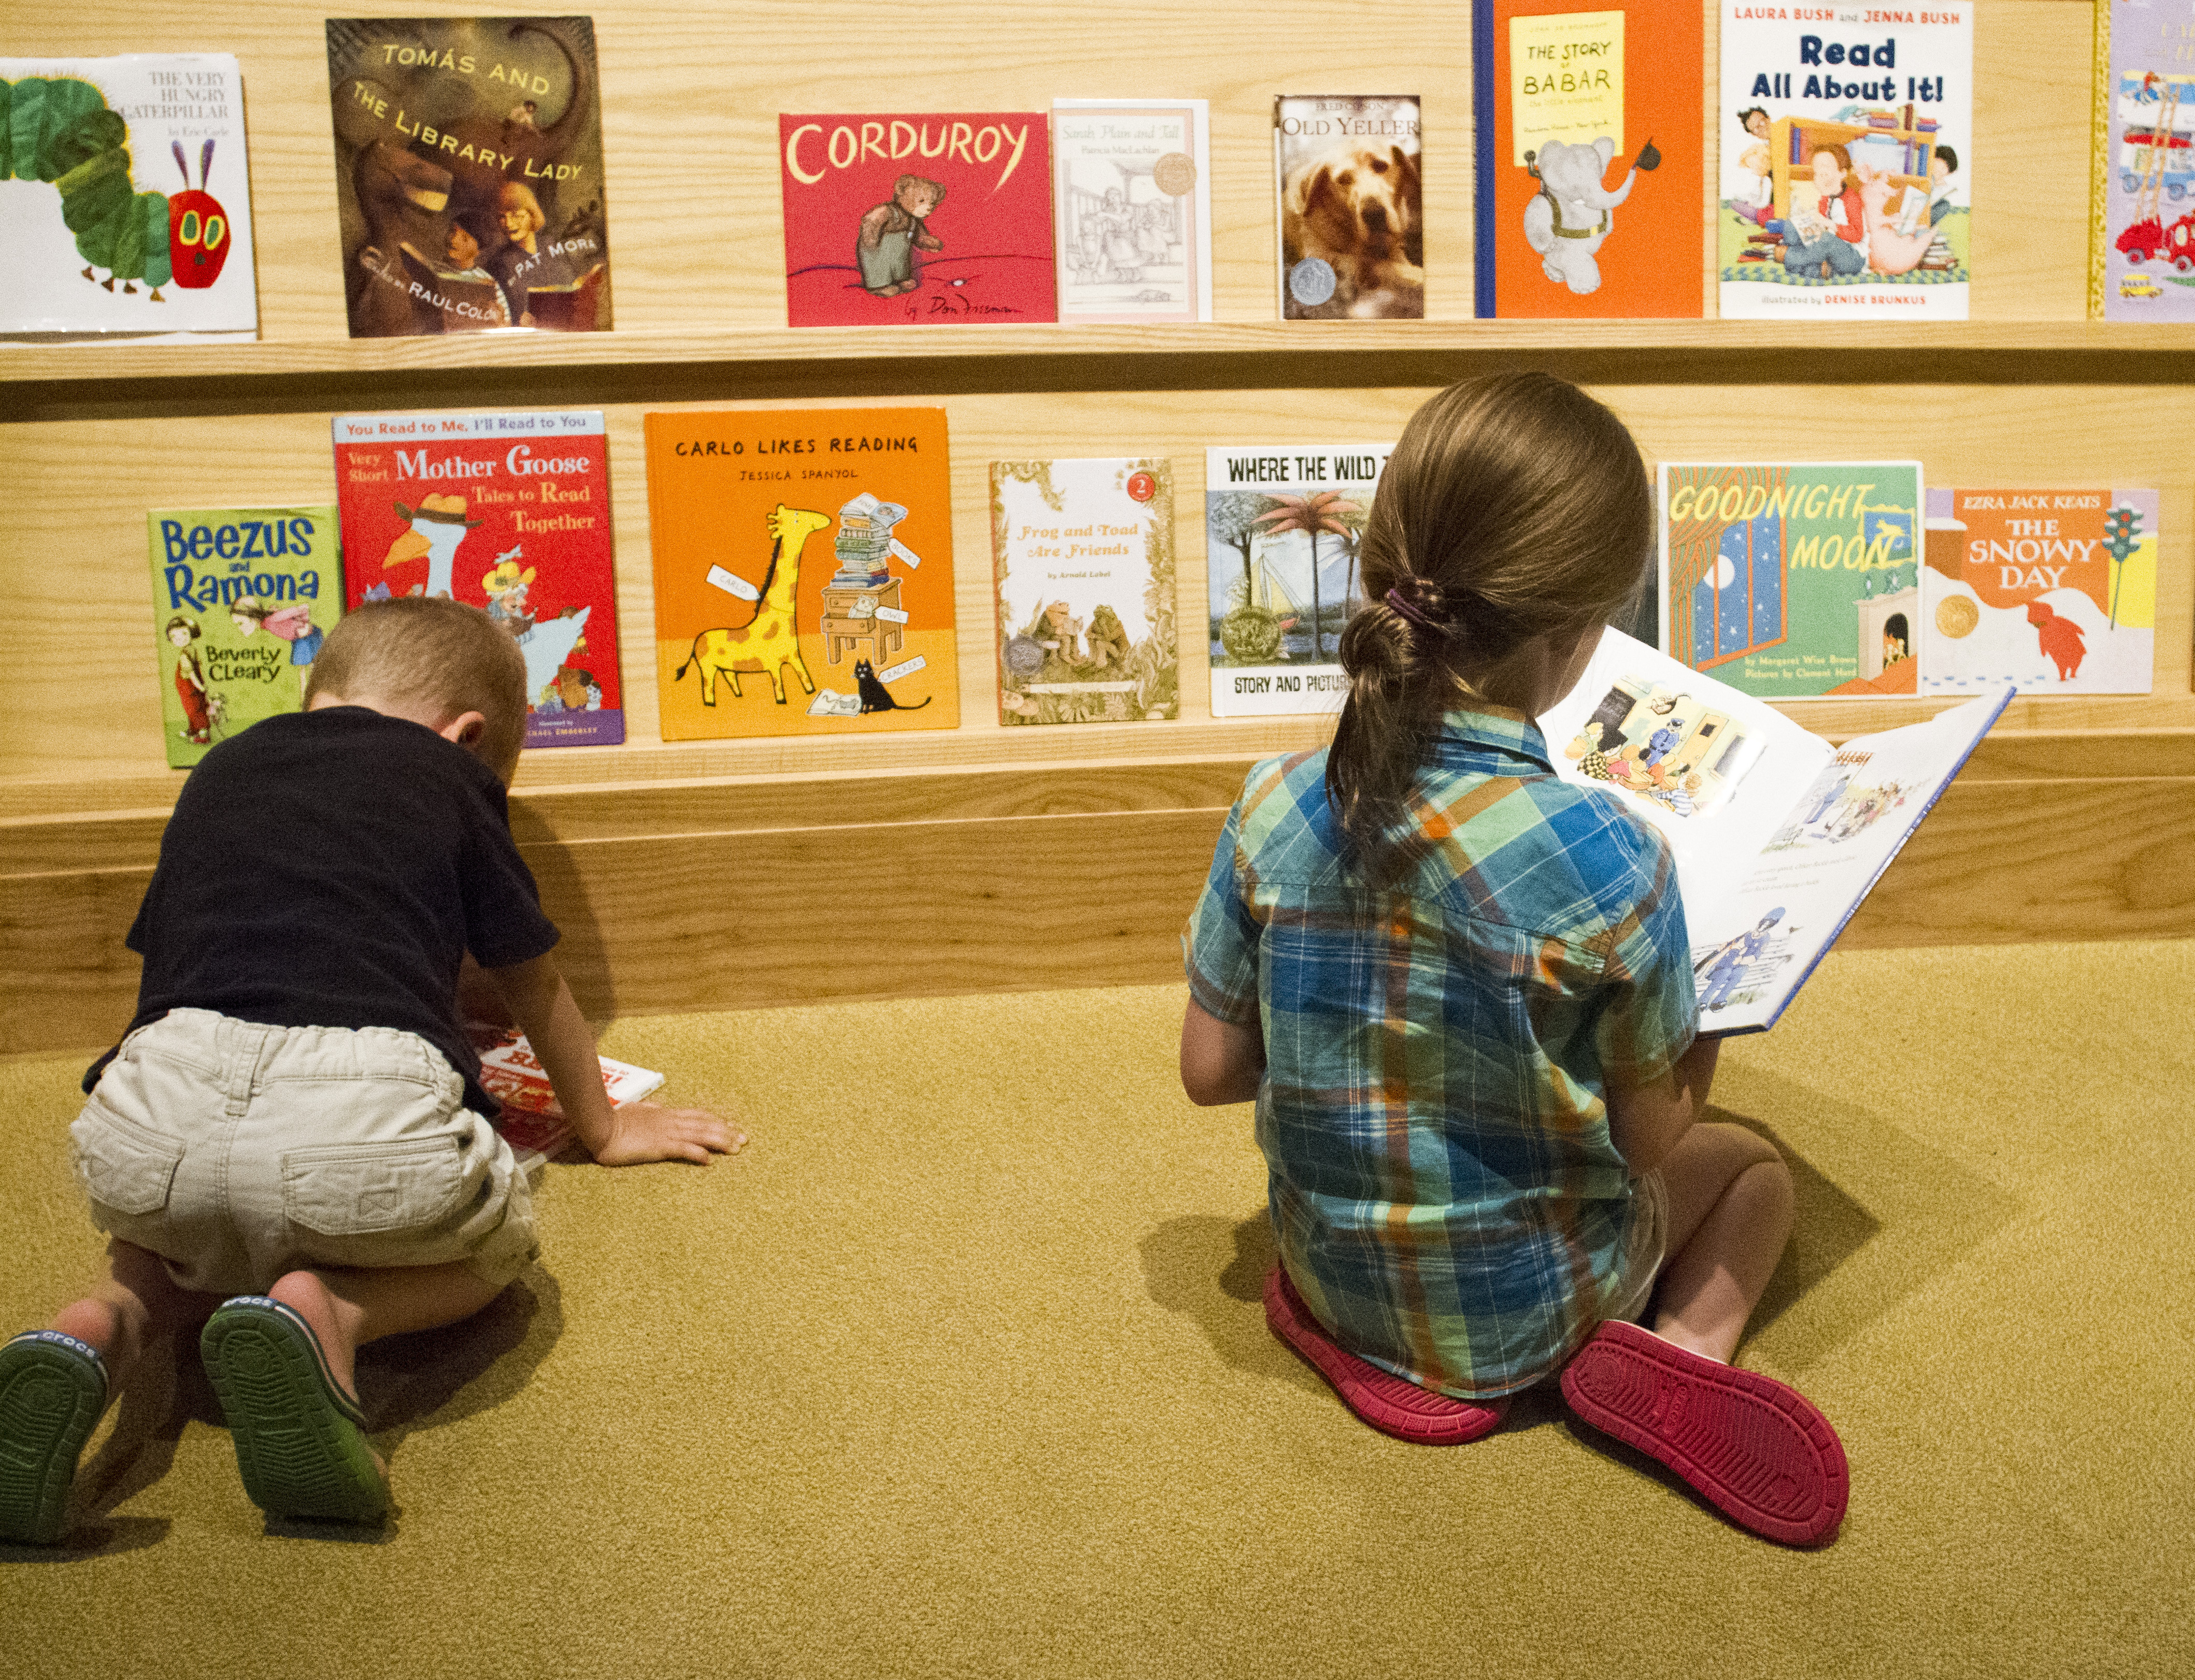 Two young children enjoying the reading area in the No Child Left Behind area of the George W Bush museum